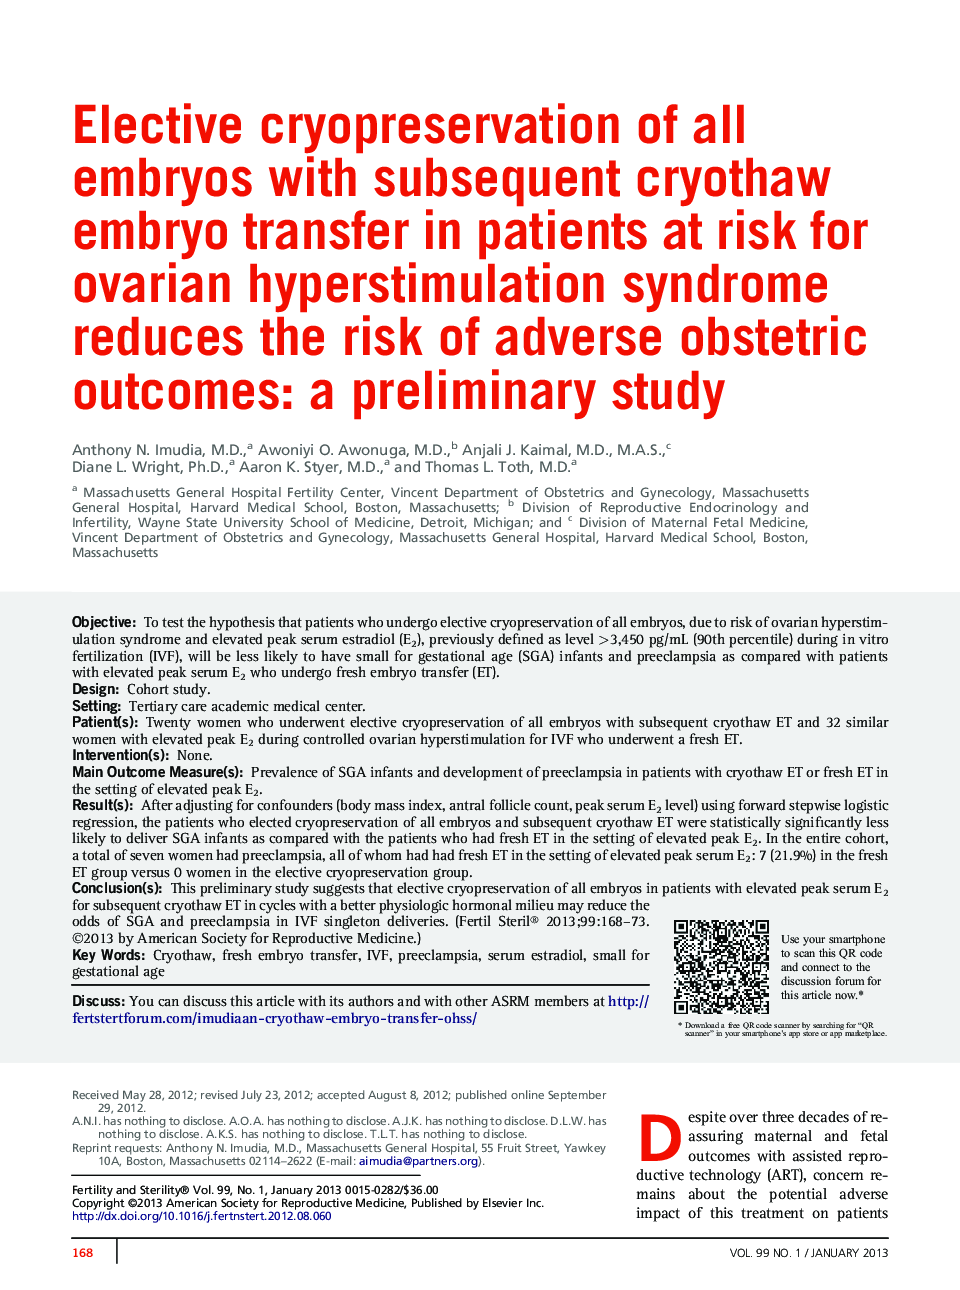 Elective cryopreservation of all embryos with subsequent cryothaw embryo transfer in patients at risk for ovarian hyperstimulation syndrome reduces the risk of adverse obstetric outcomes: a preliminary study